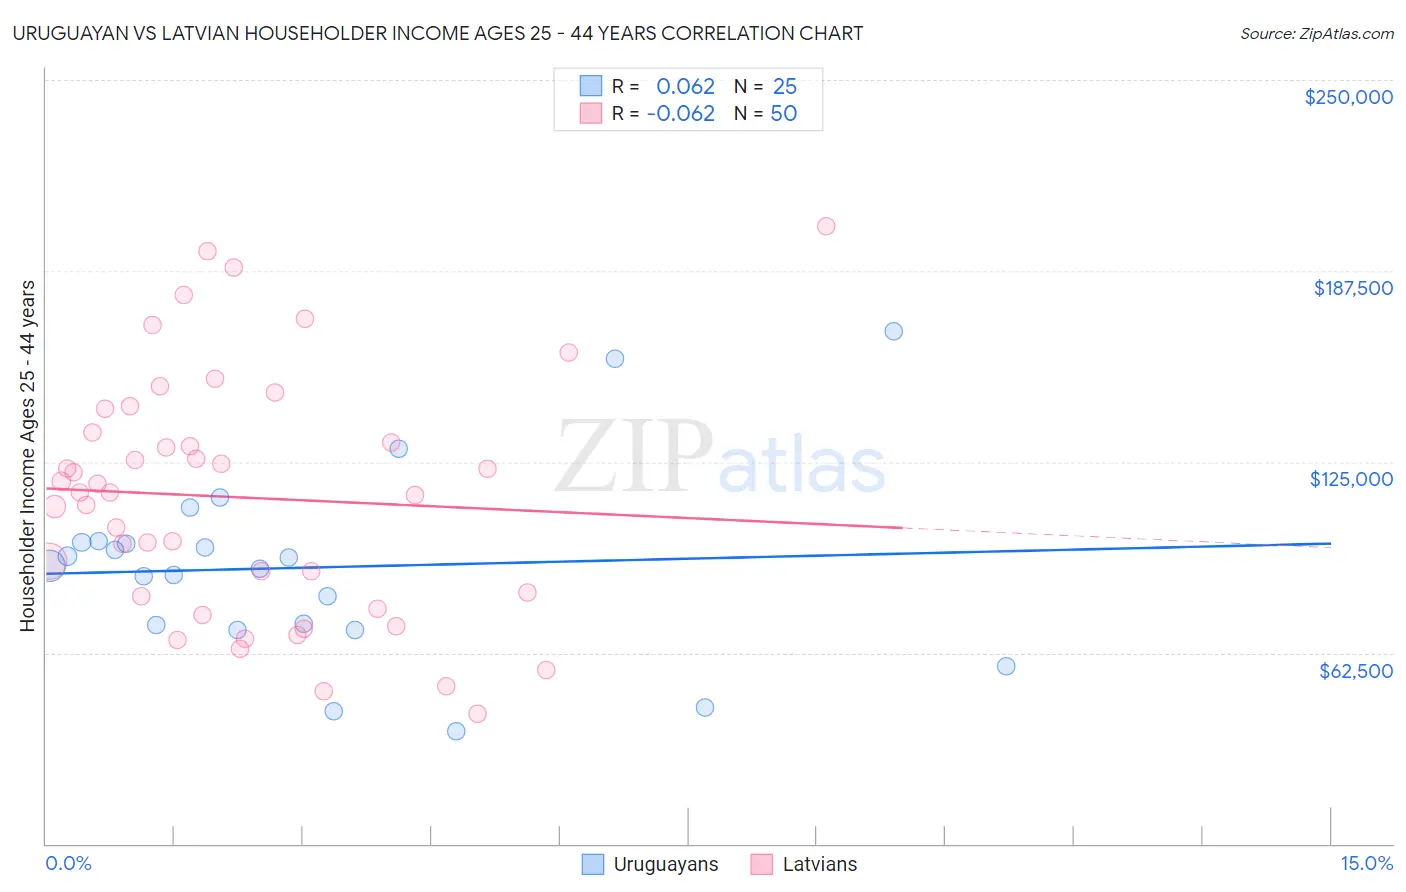 Uruguayan vs Latvian Householder Income Ages 25 - 44 years